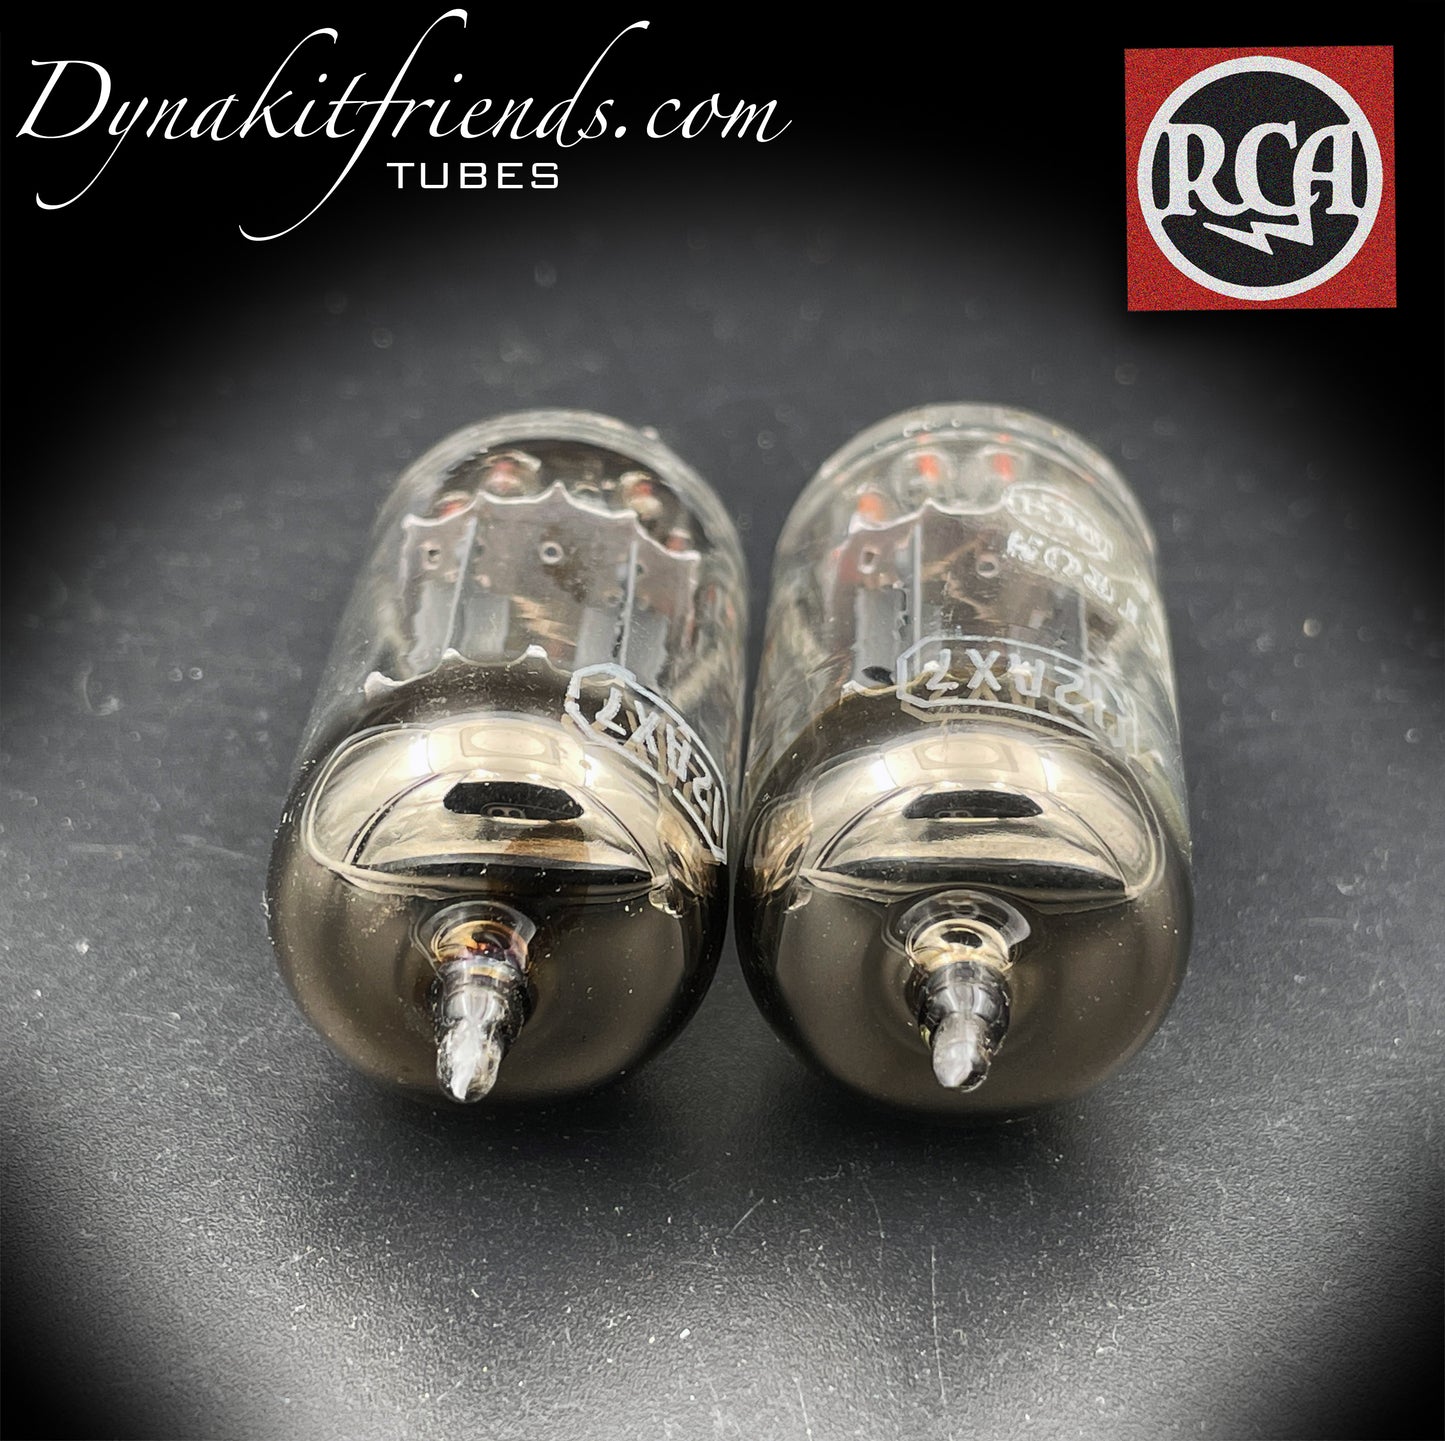 12AX7 ( ECC83 ) RCA Long Gray Plates [] Getter Matched Tubes MADE IN USA '59